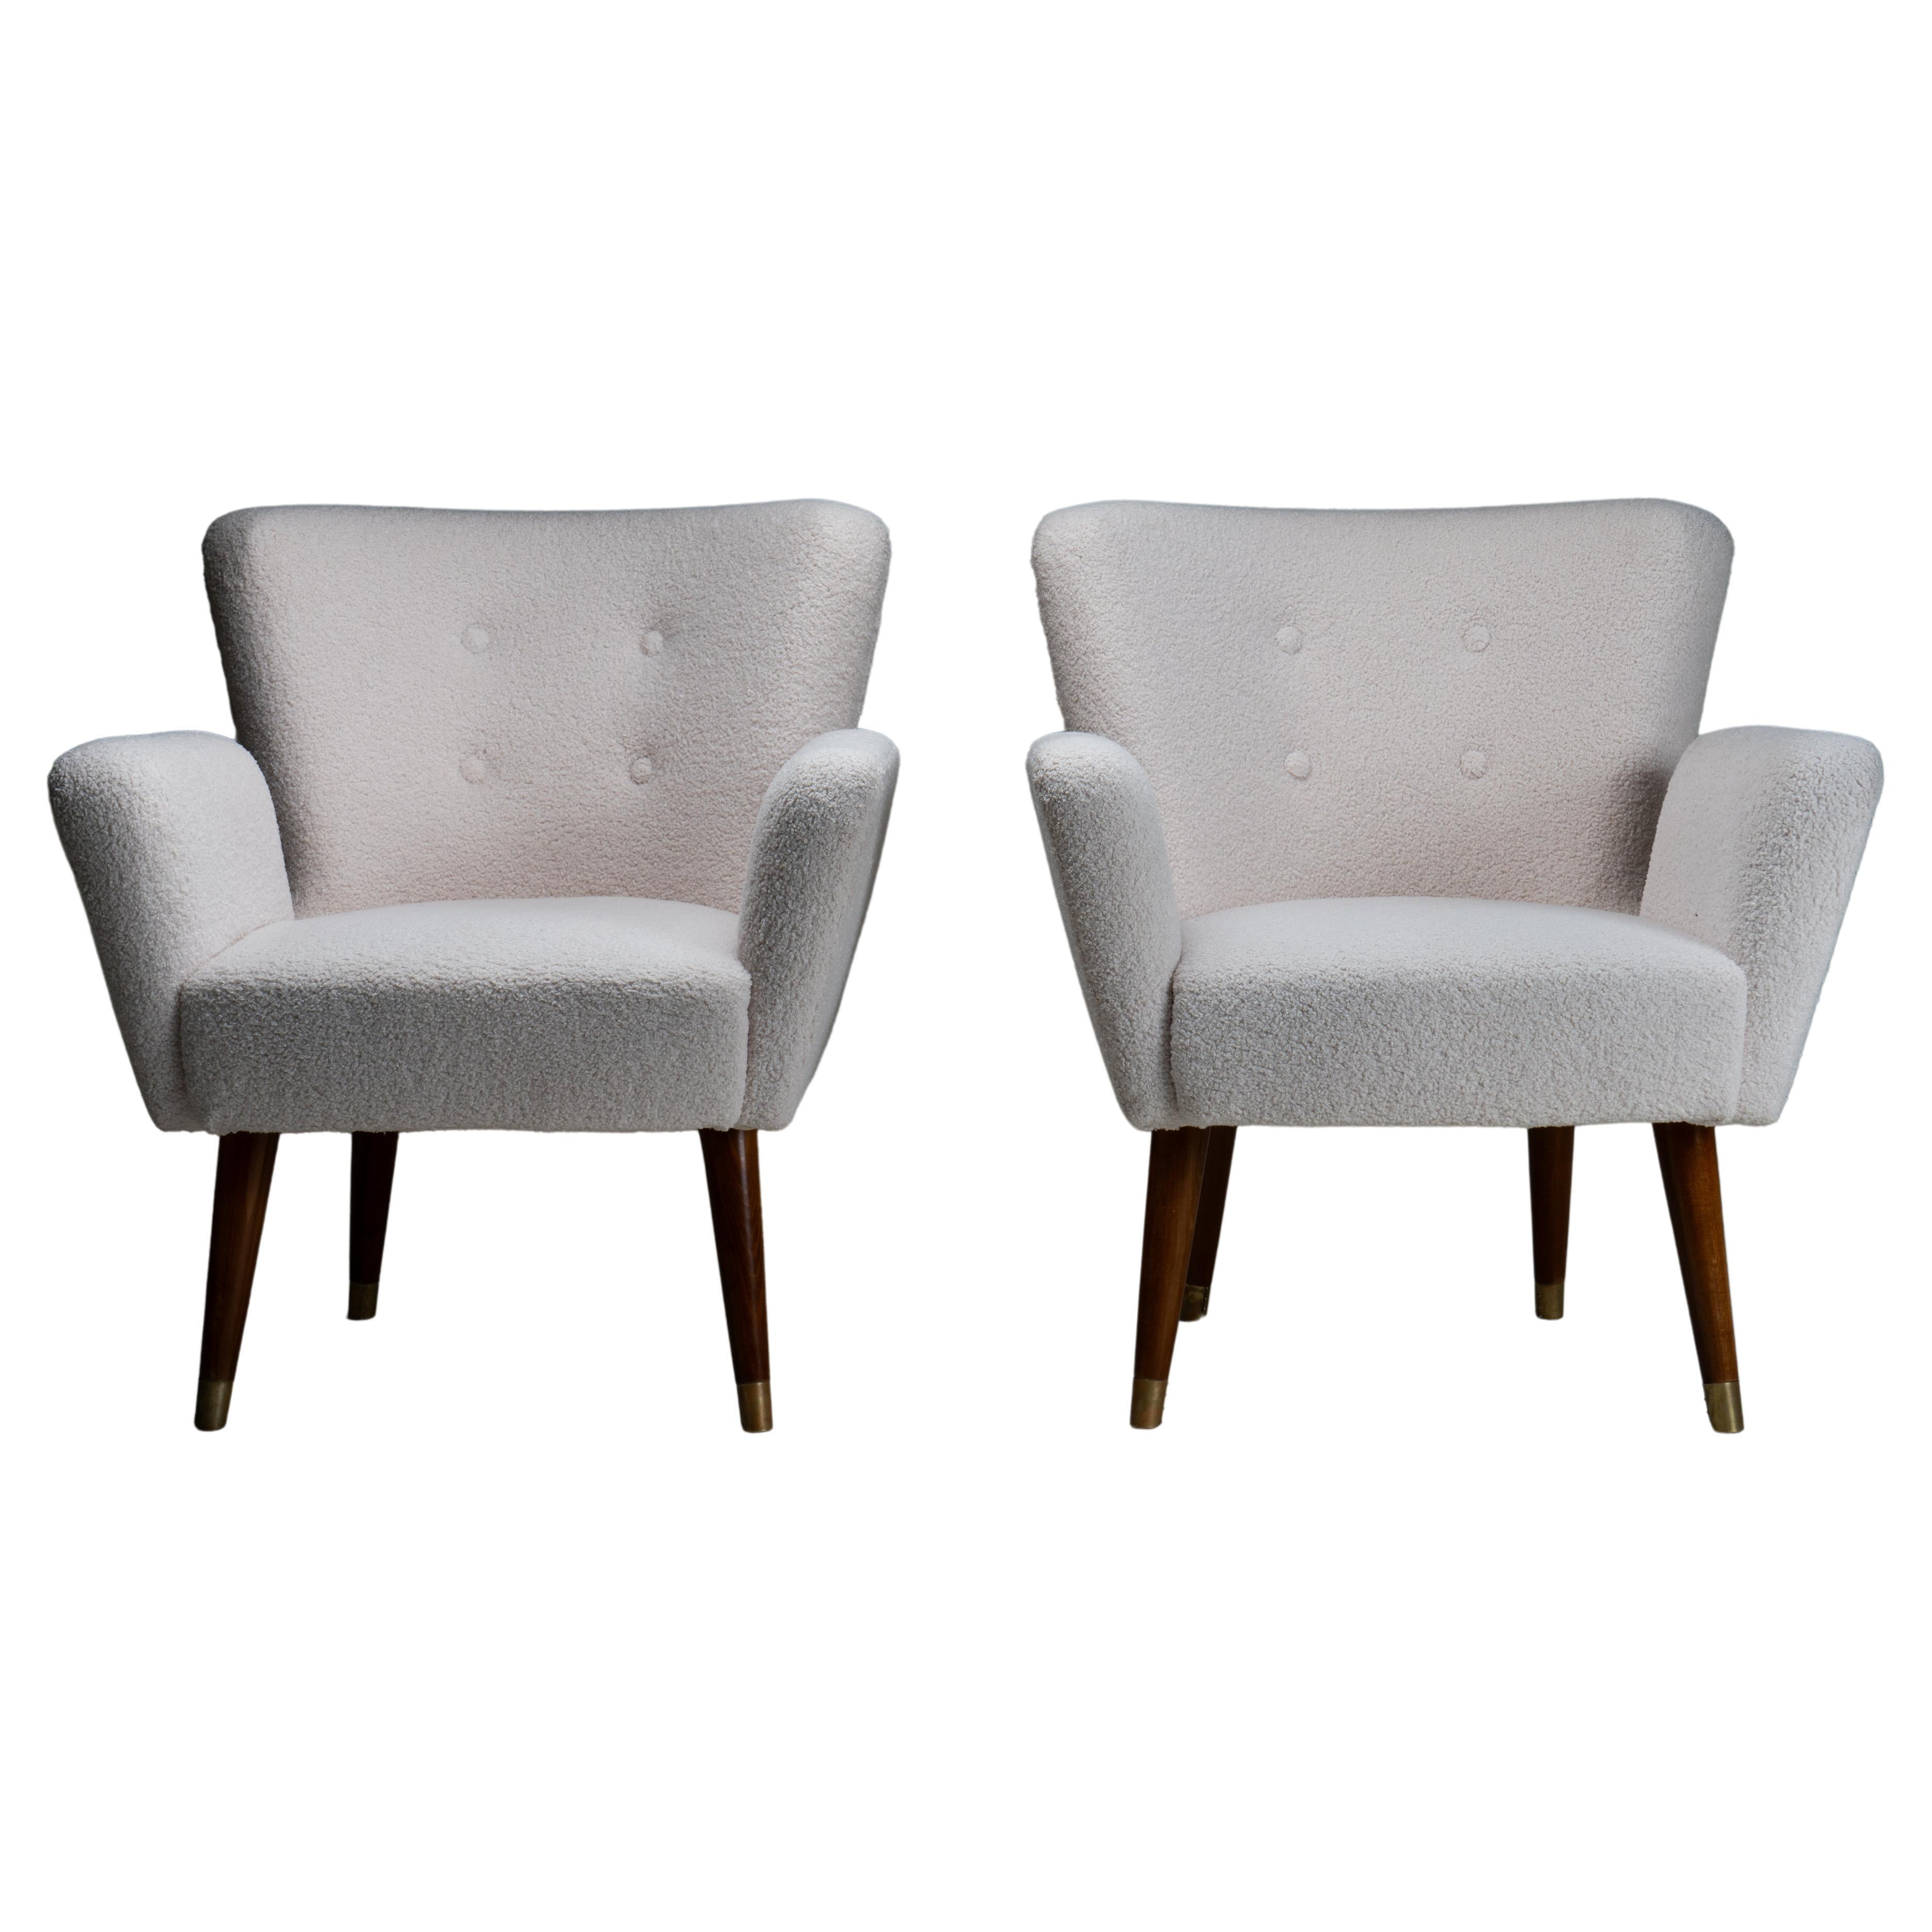 A Pair of Socialist Mid-Century Lounge Chairs For Sale